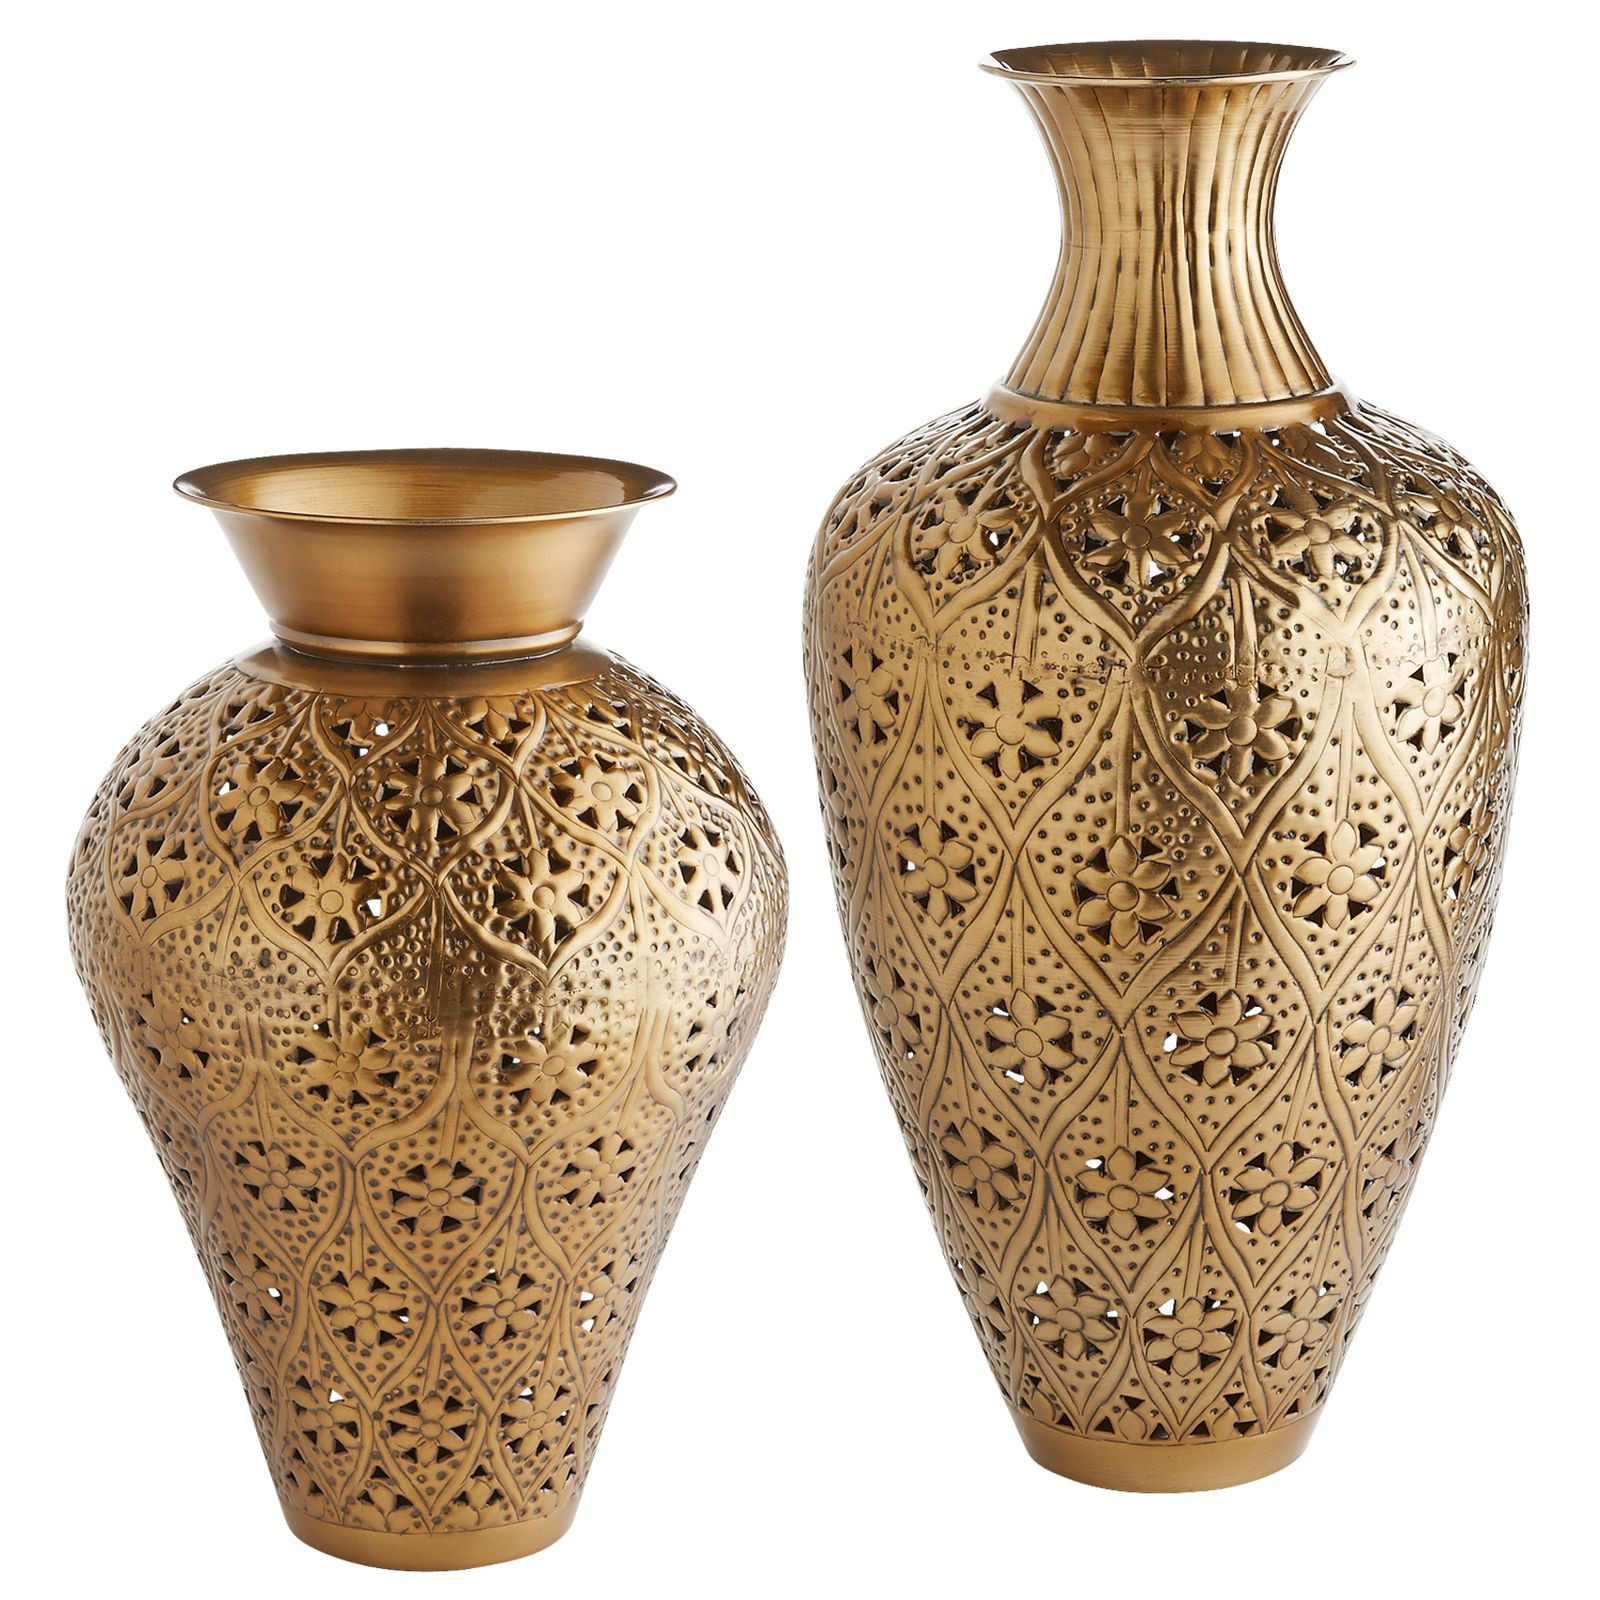 28 Amazing Pier One Vases 2024 free download pier one vases of found the perfect additions to your diverse collection our with regard to found the perfect additions to your diverse collection our unconventional vases evoke that bohemia